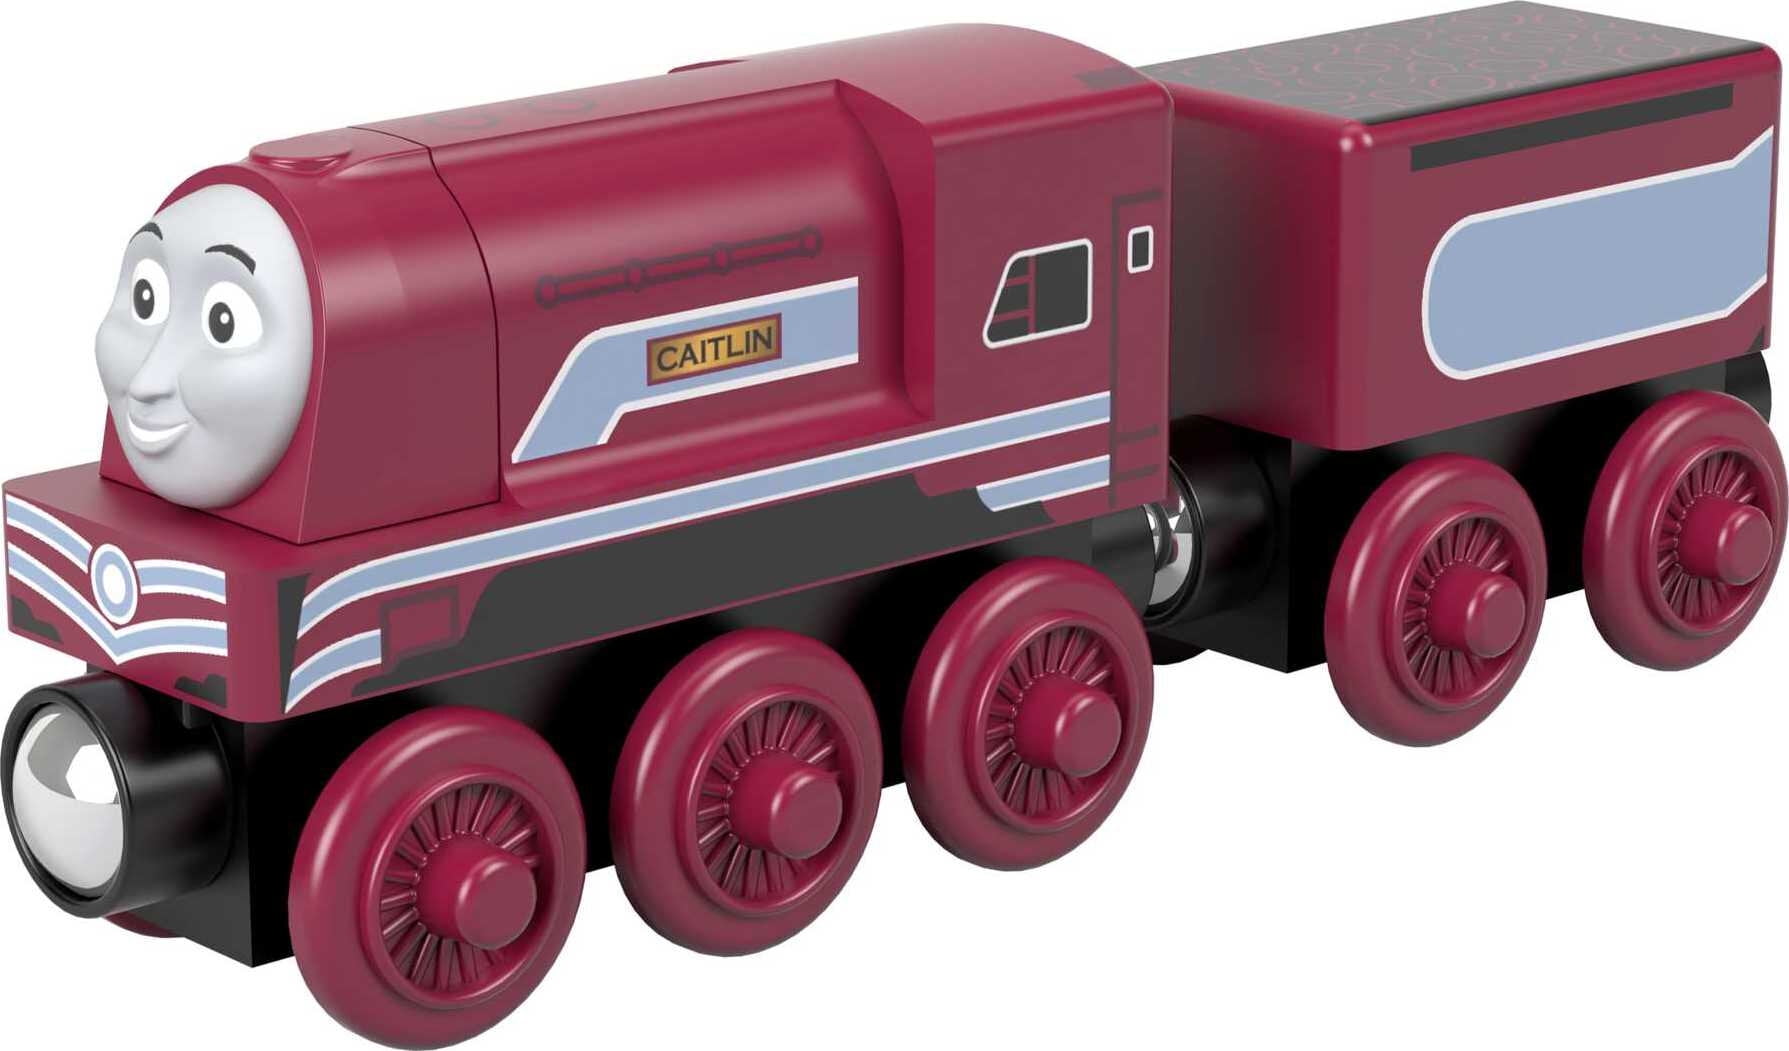 Multicoloured Wooden Small Engine Nia Thomas & Friends GGG31 Toy